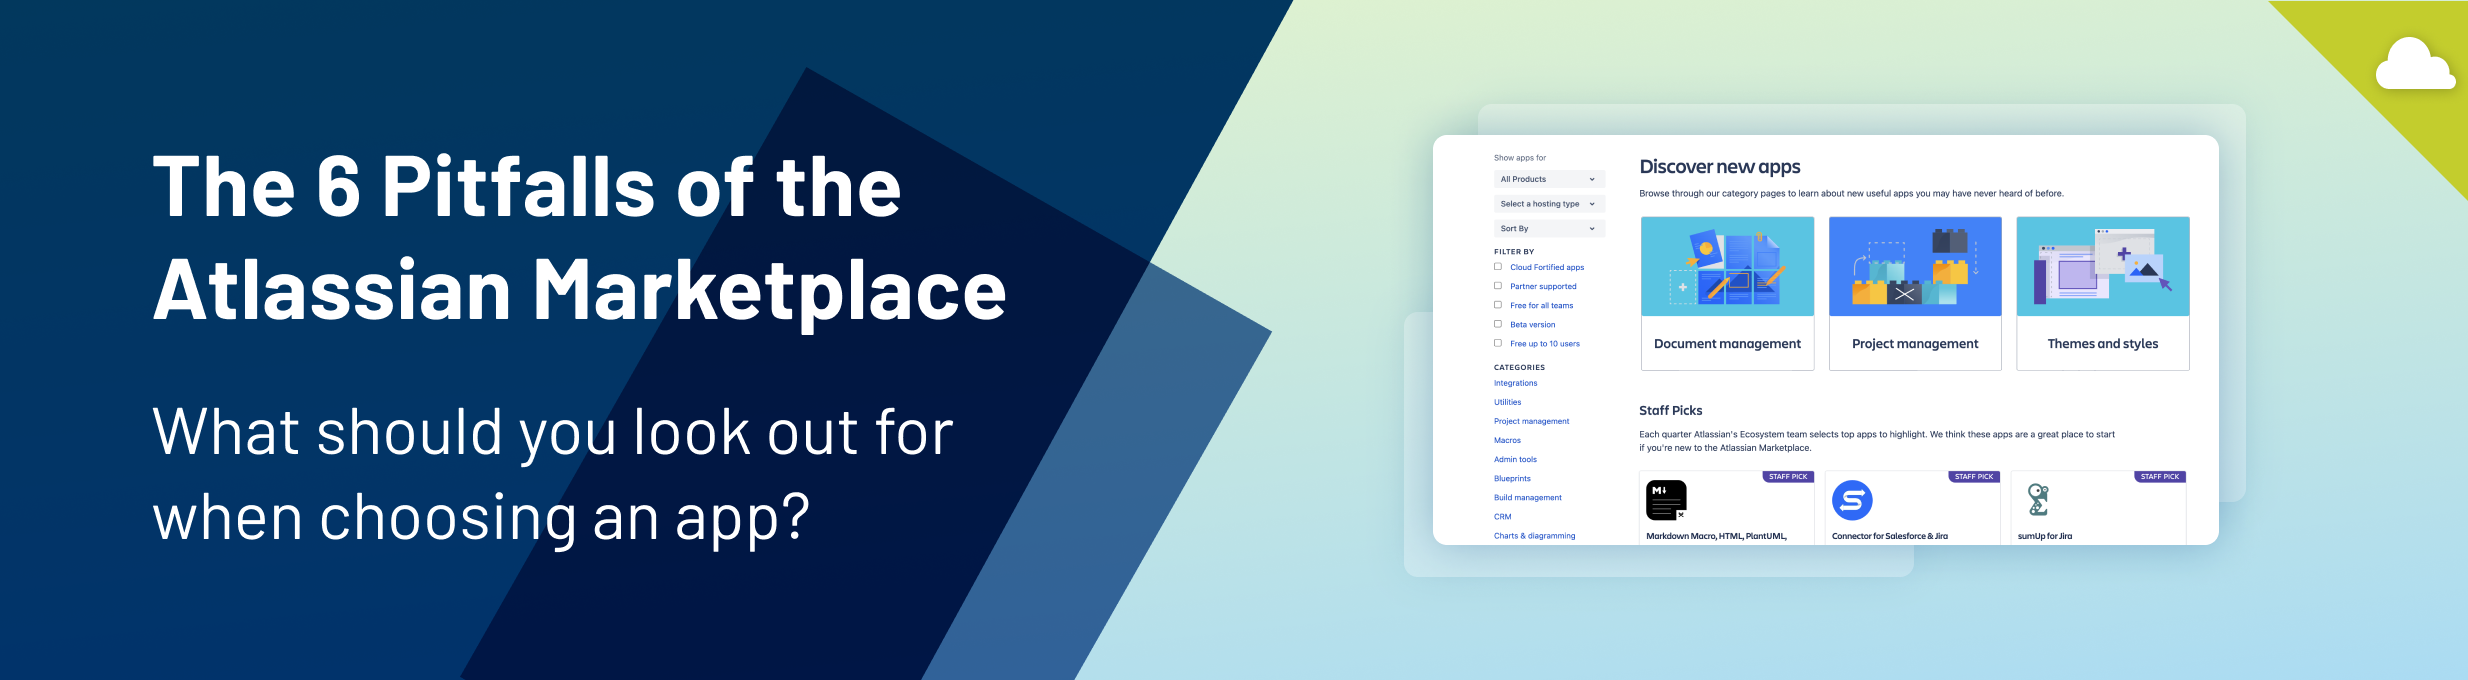 The 6 pitfalls of the Atlassian Marketplace: What should you look out for when choosing an app? - banner